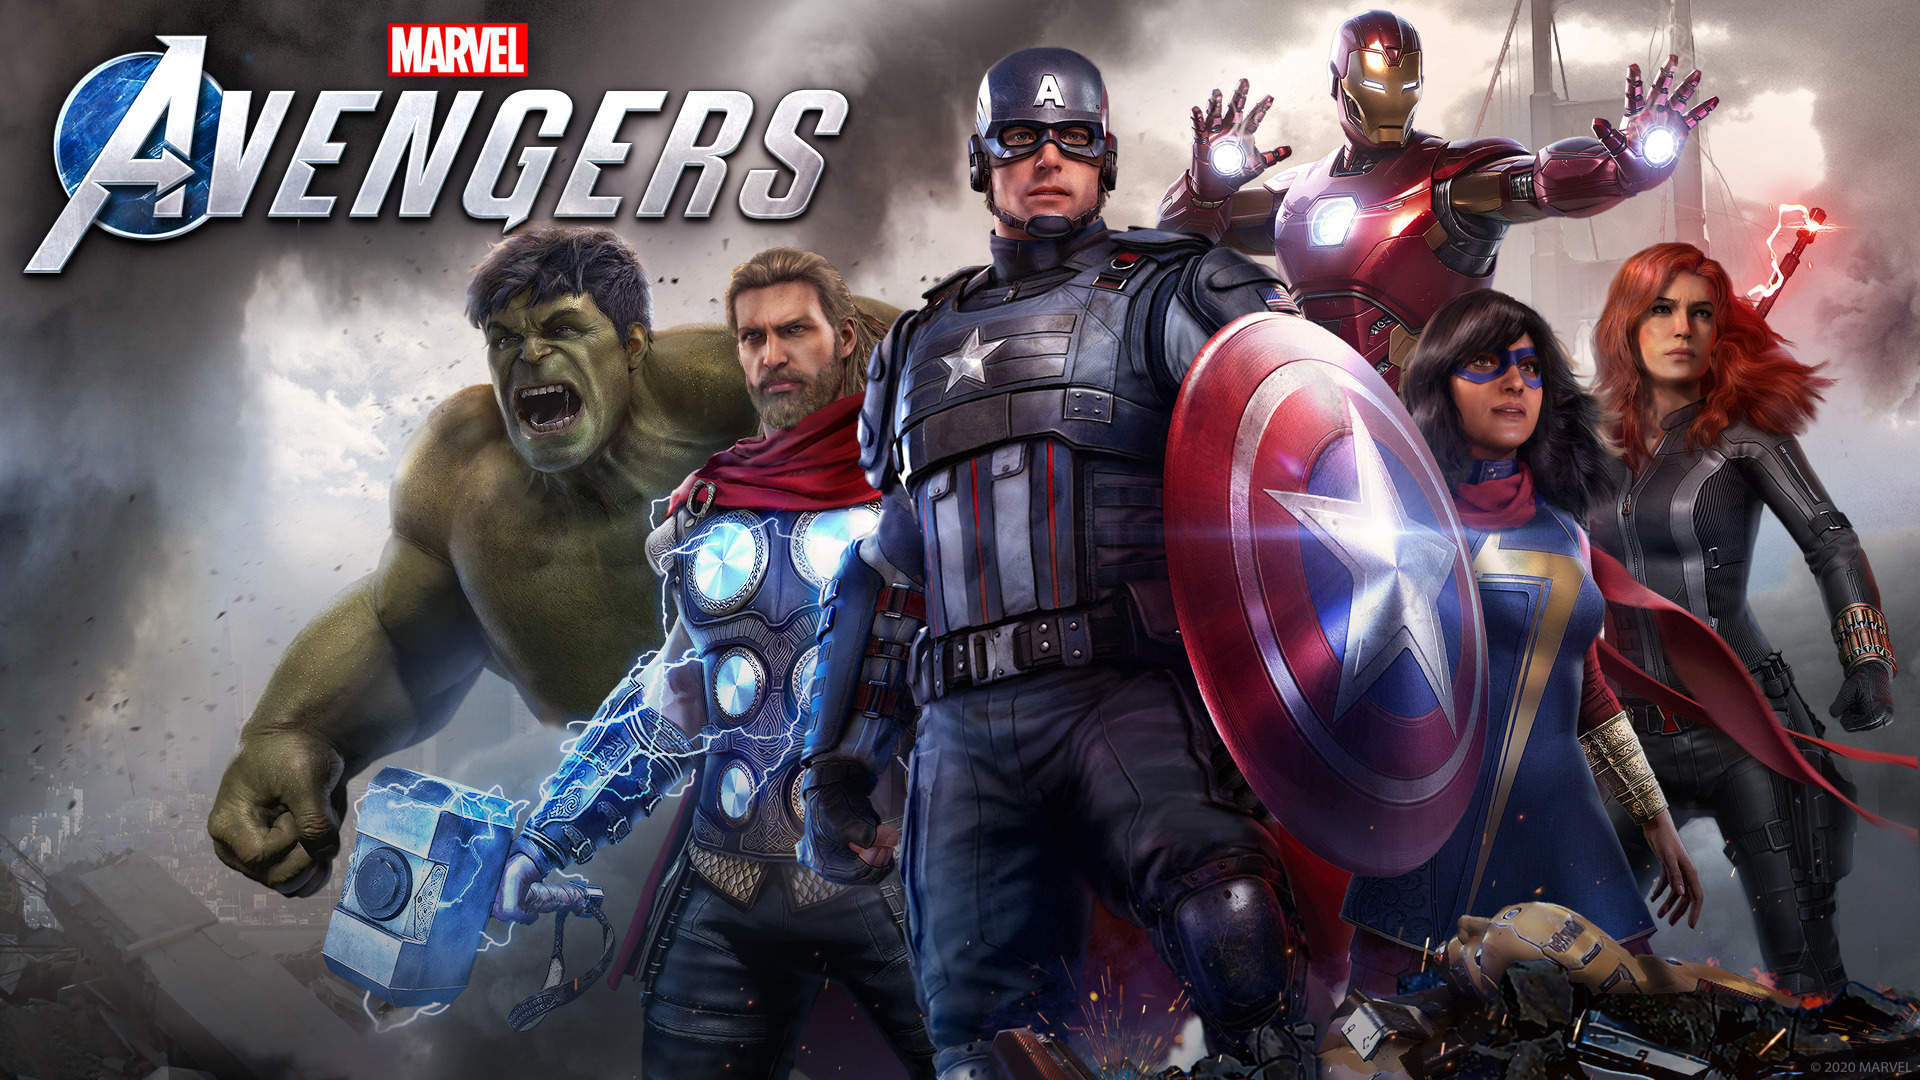 The Avengers download the new